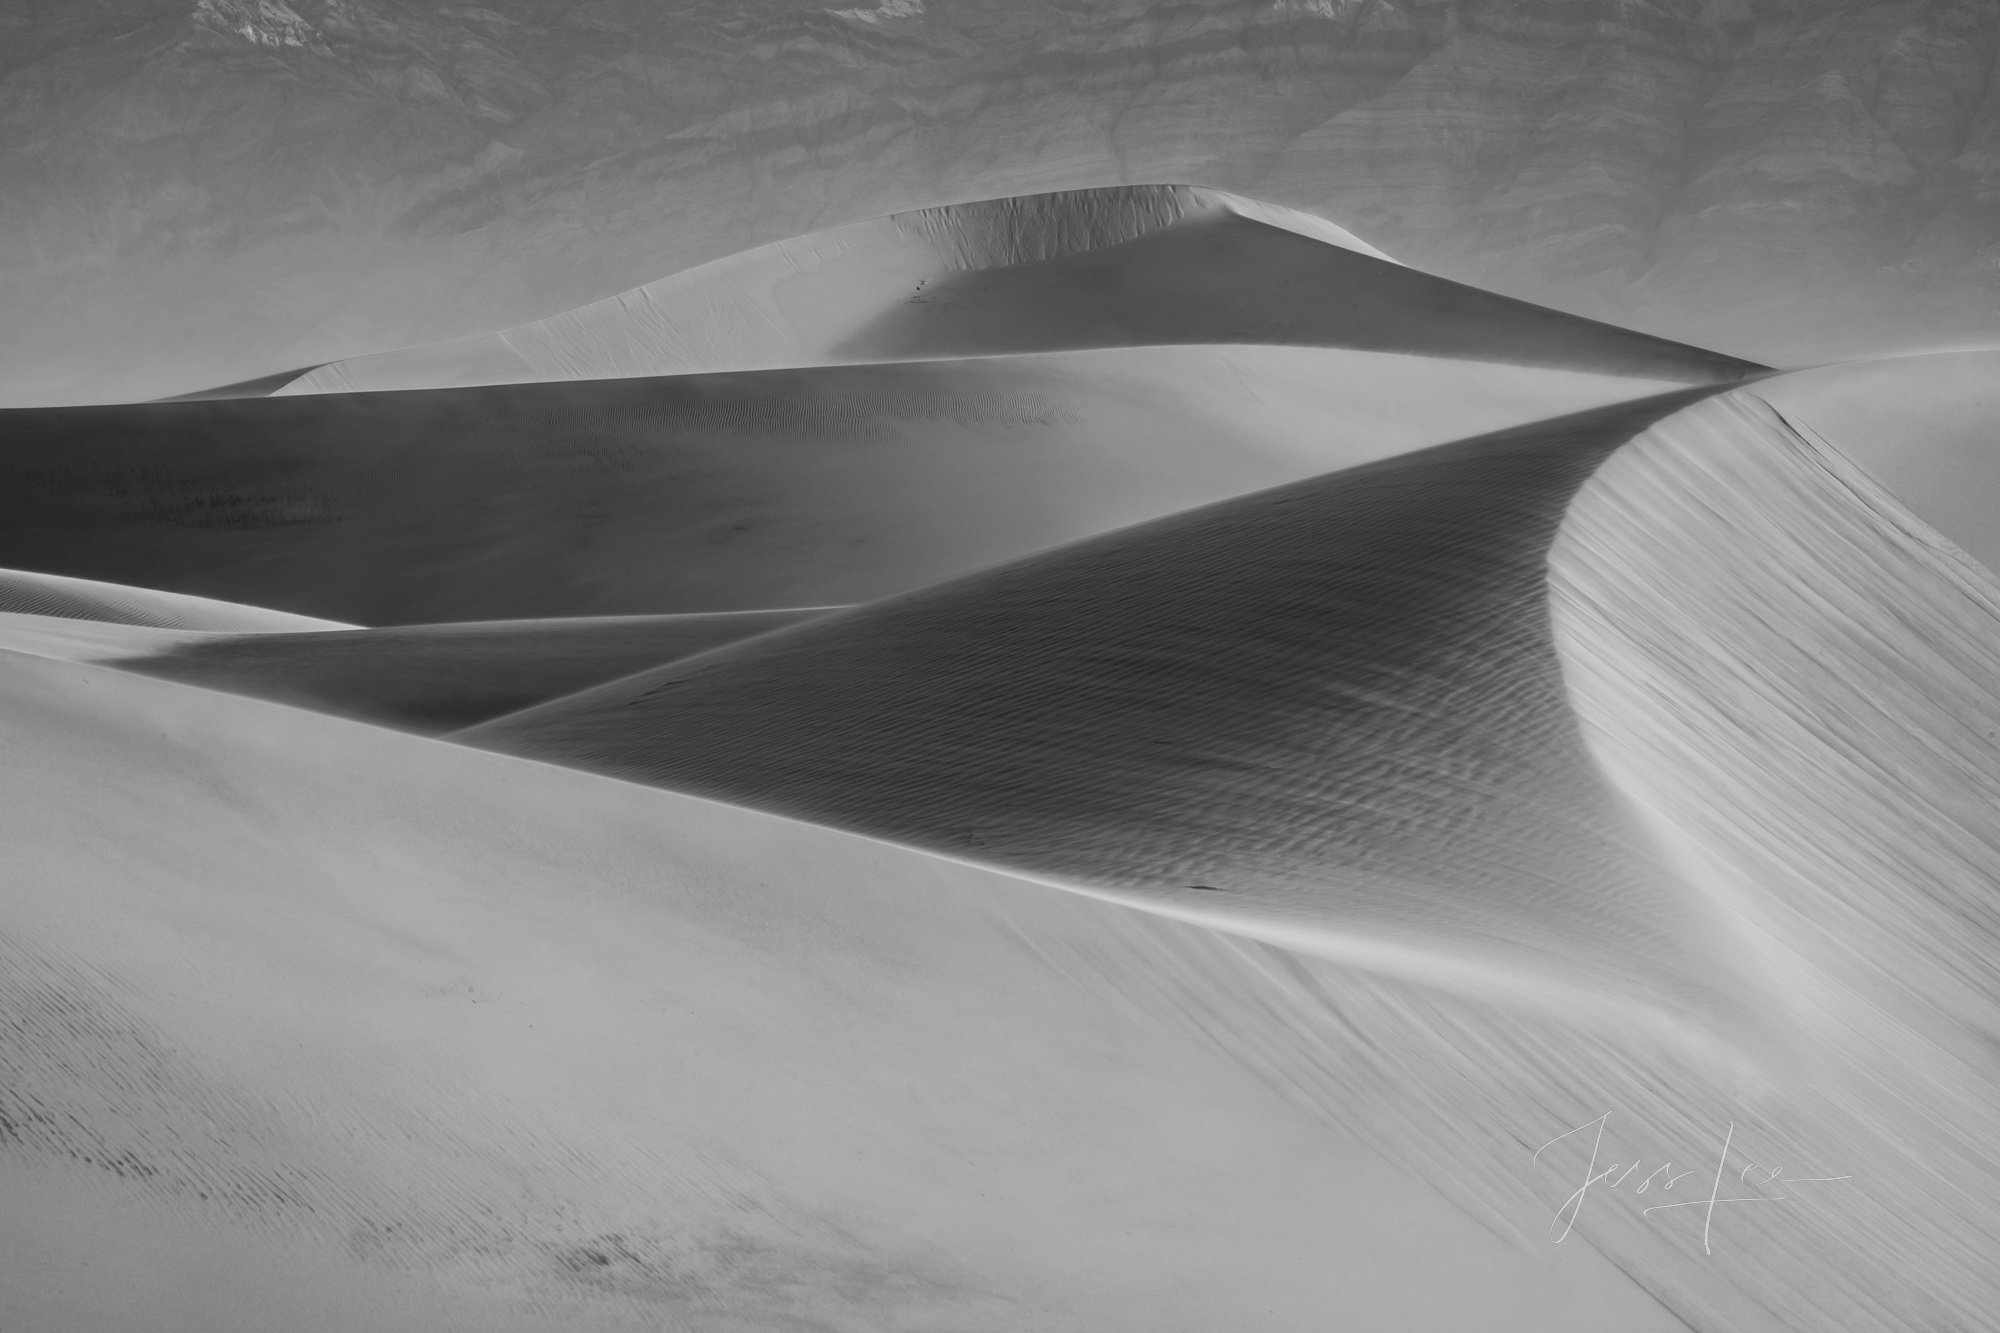 Sand so Soft, a Fine Art Limited Edition Photo Print from Death Valley National Park. Enjoy this beautiful piece of desert wall...